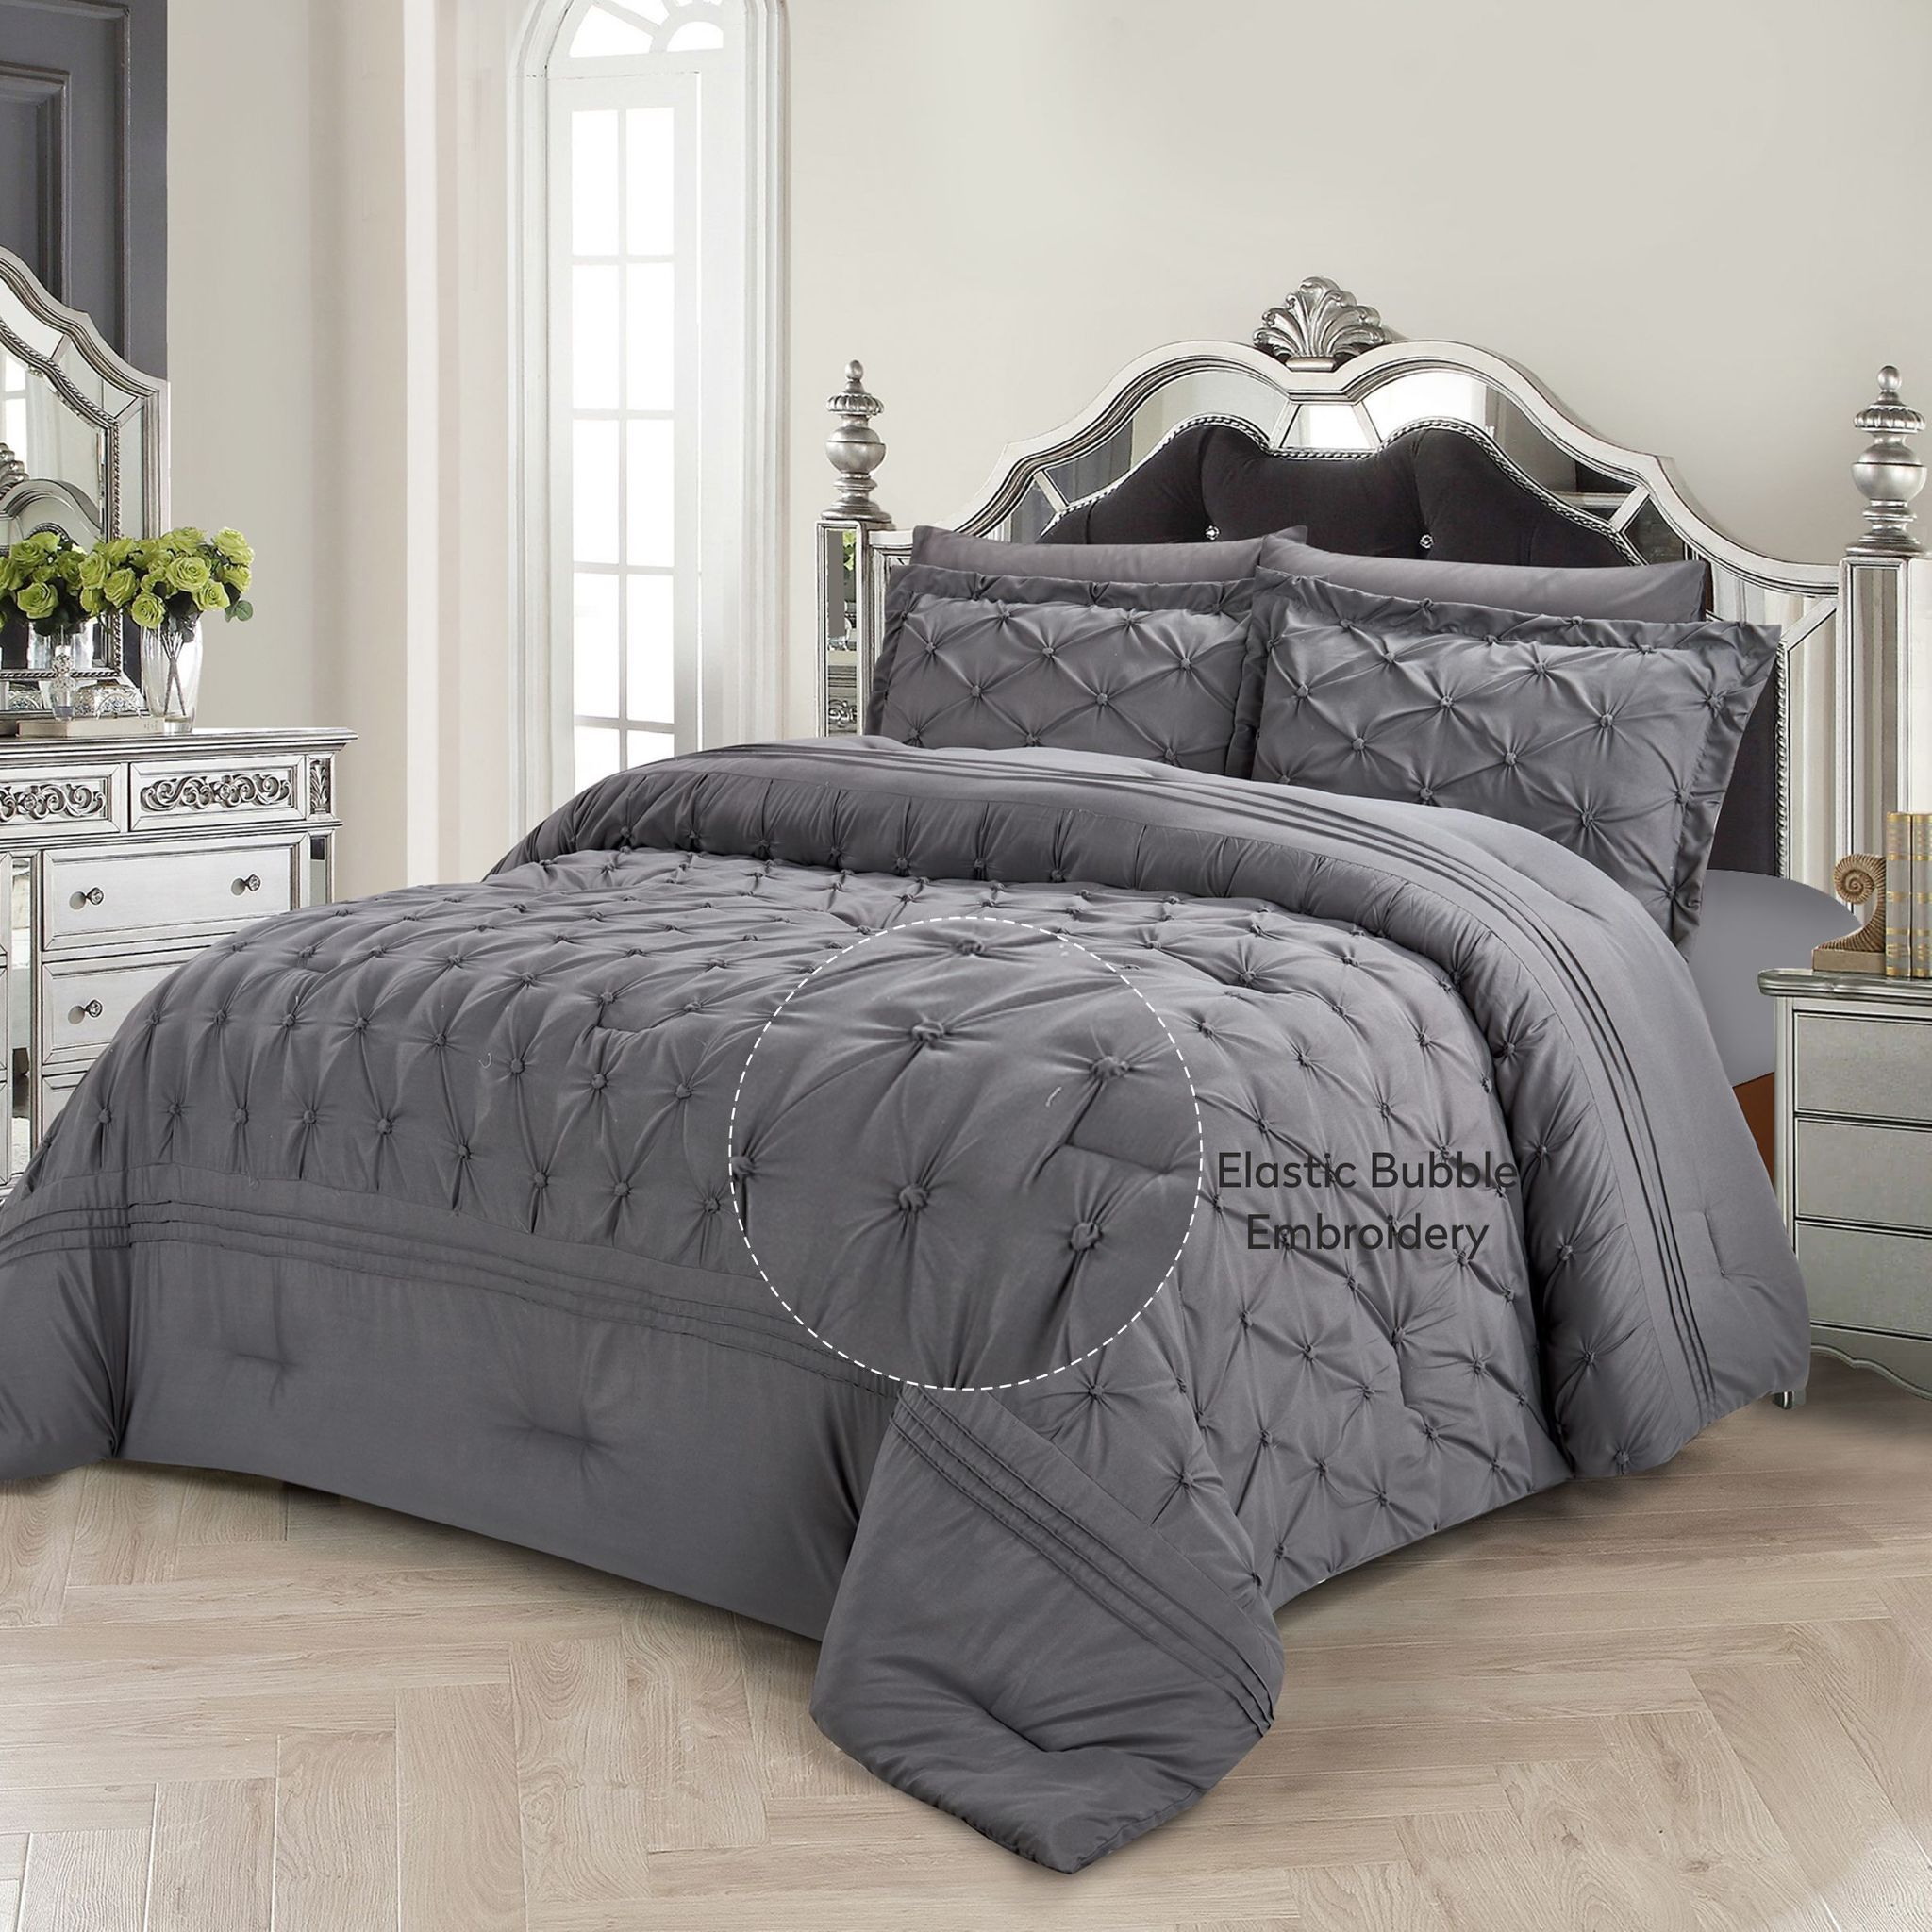 Bubble Embroidered Comforter Set 4-Piece Twin Grey